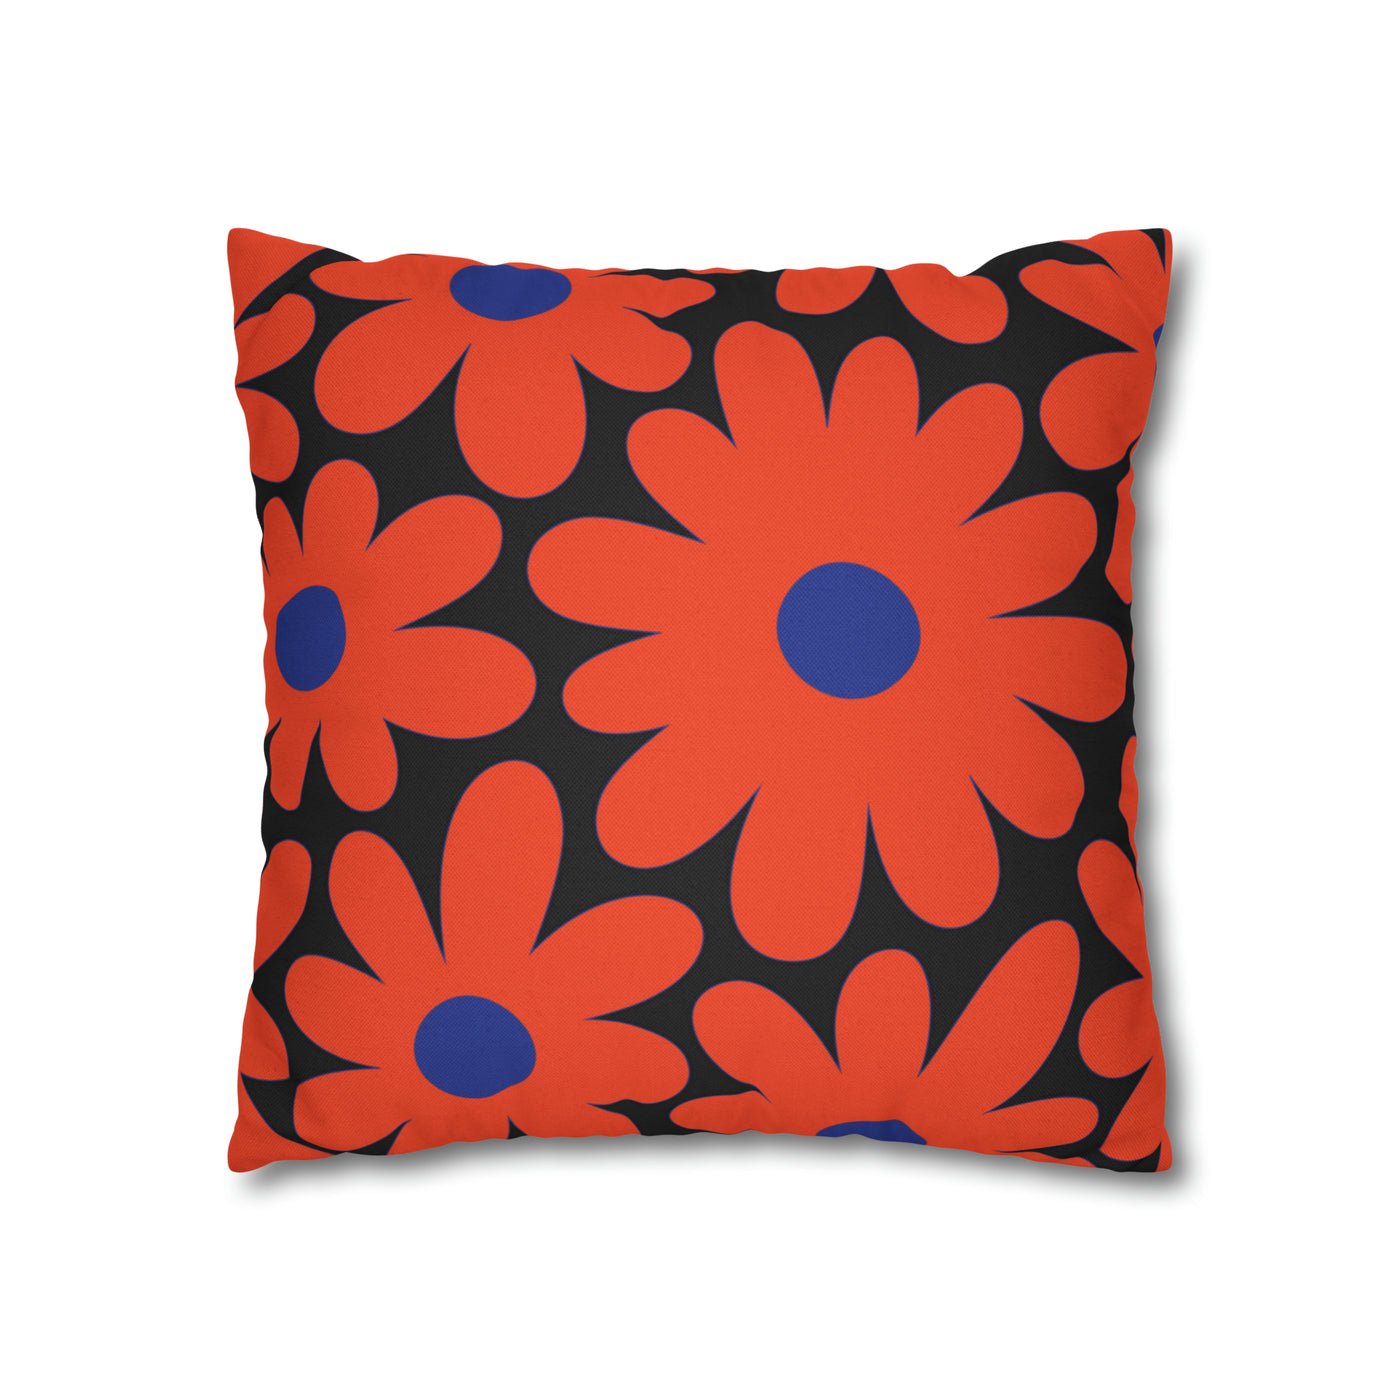 Two Color Double Sided Groovy Flower Pillow - College Dorm Pillow - Bed Party Pillow - Florida